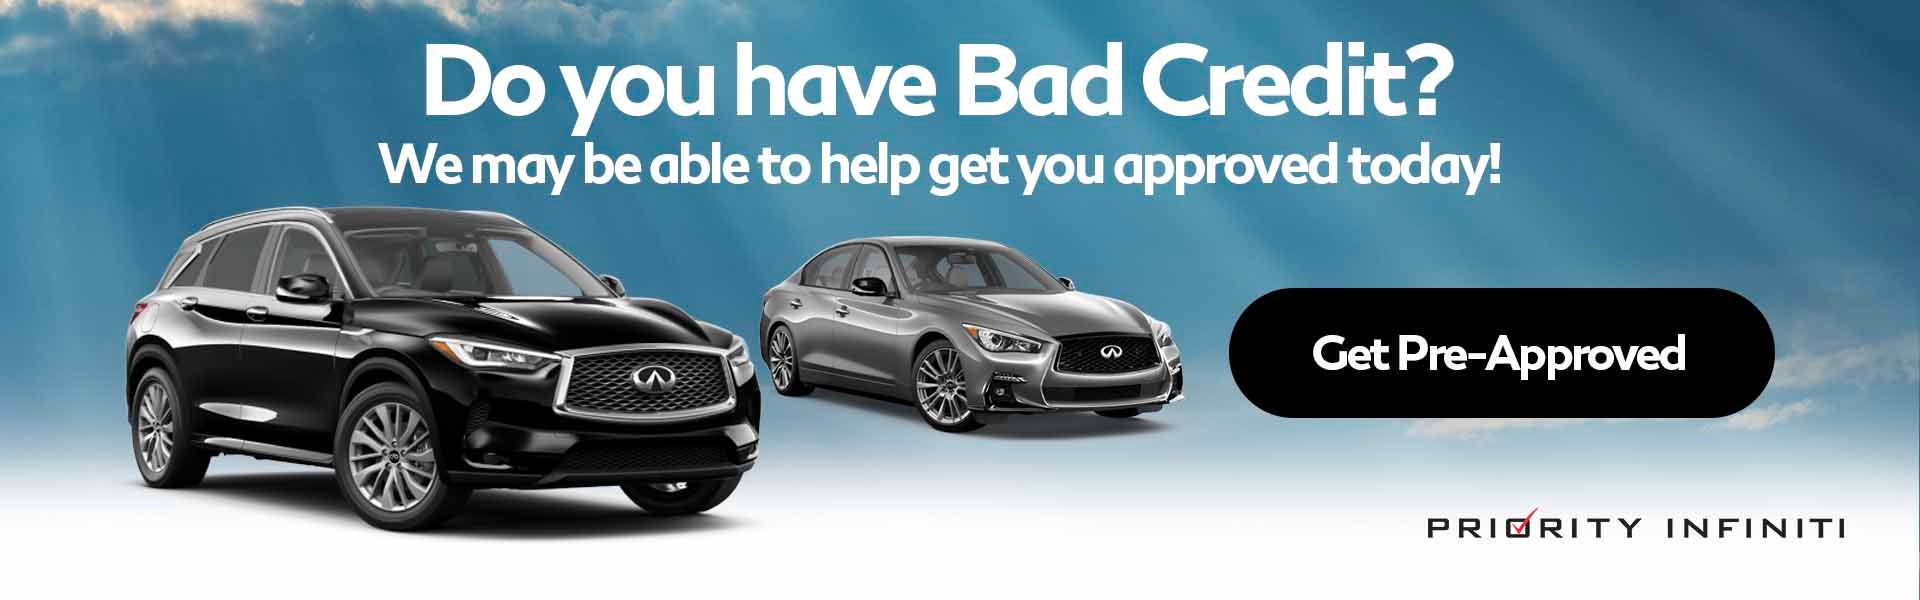 Is Your Credit Less than Perfect? We may be able to help get you approved!